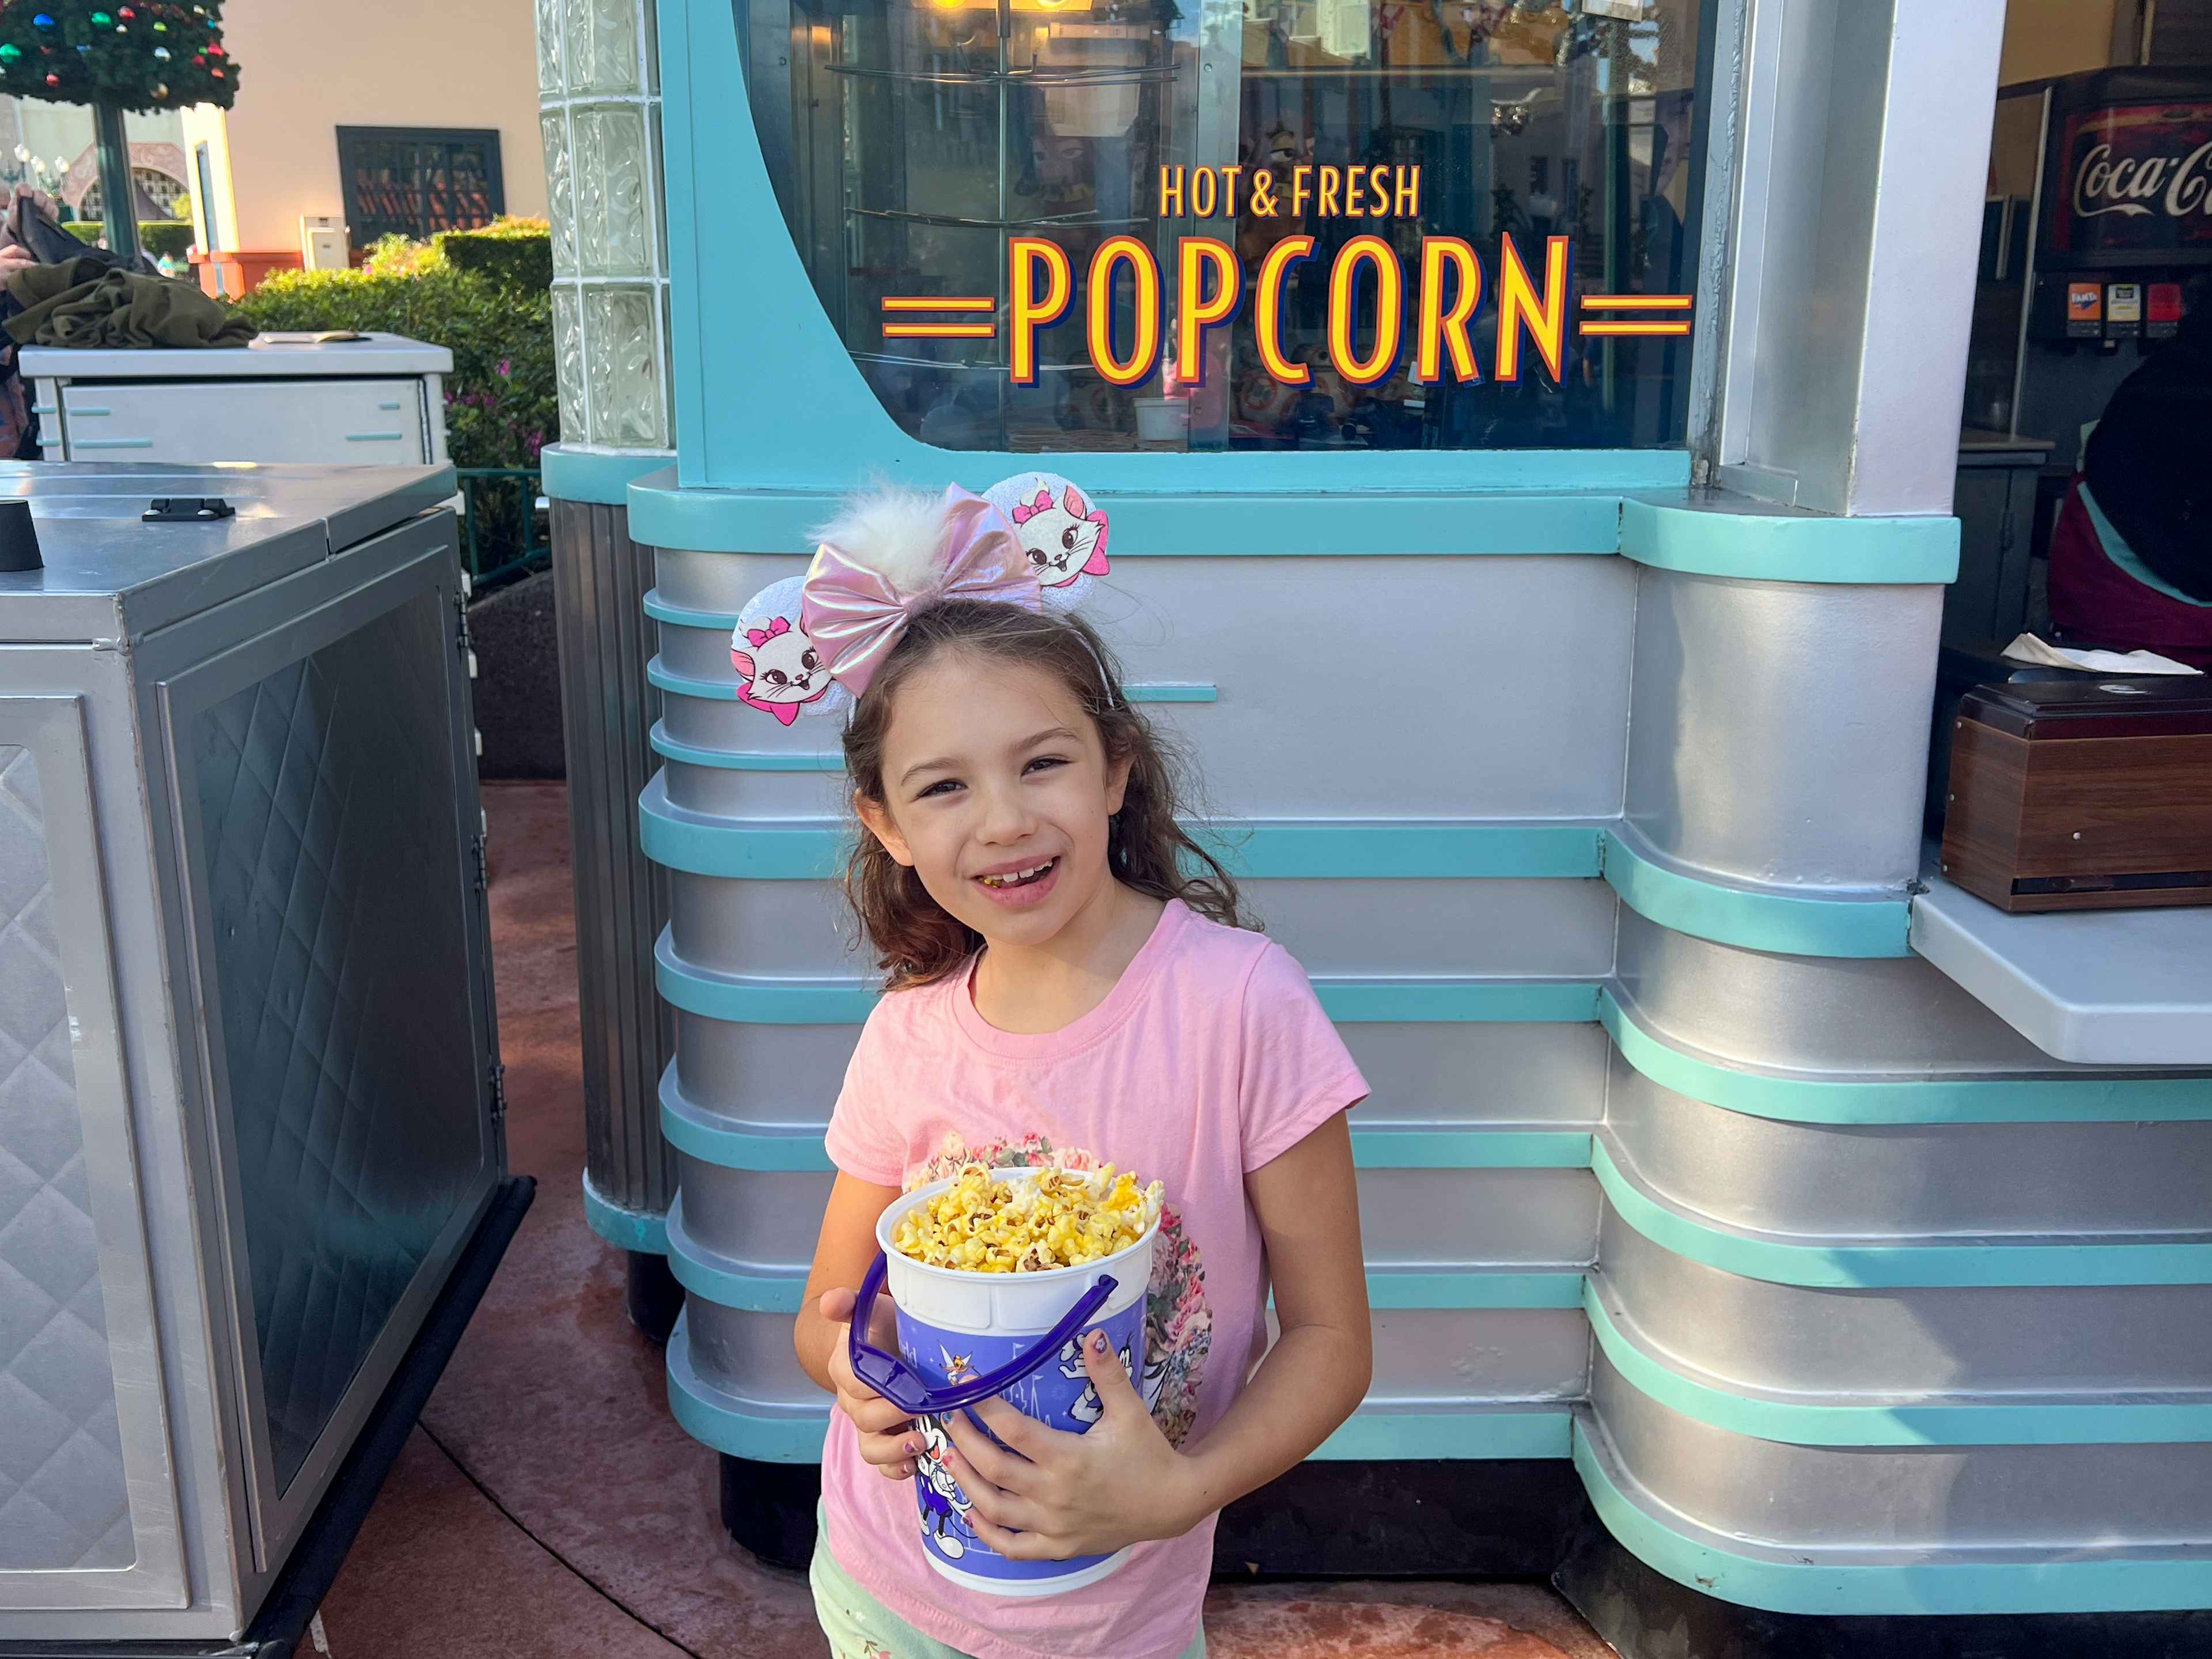 a child with mouse ears holding a popcorn bucket at Disney World